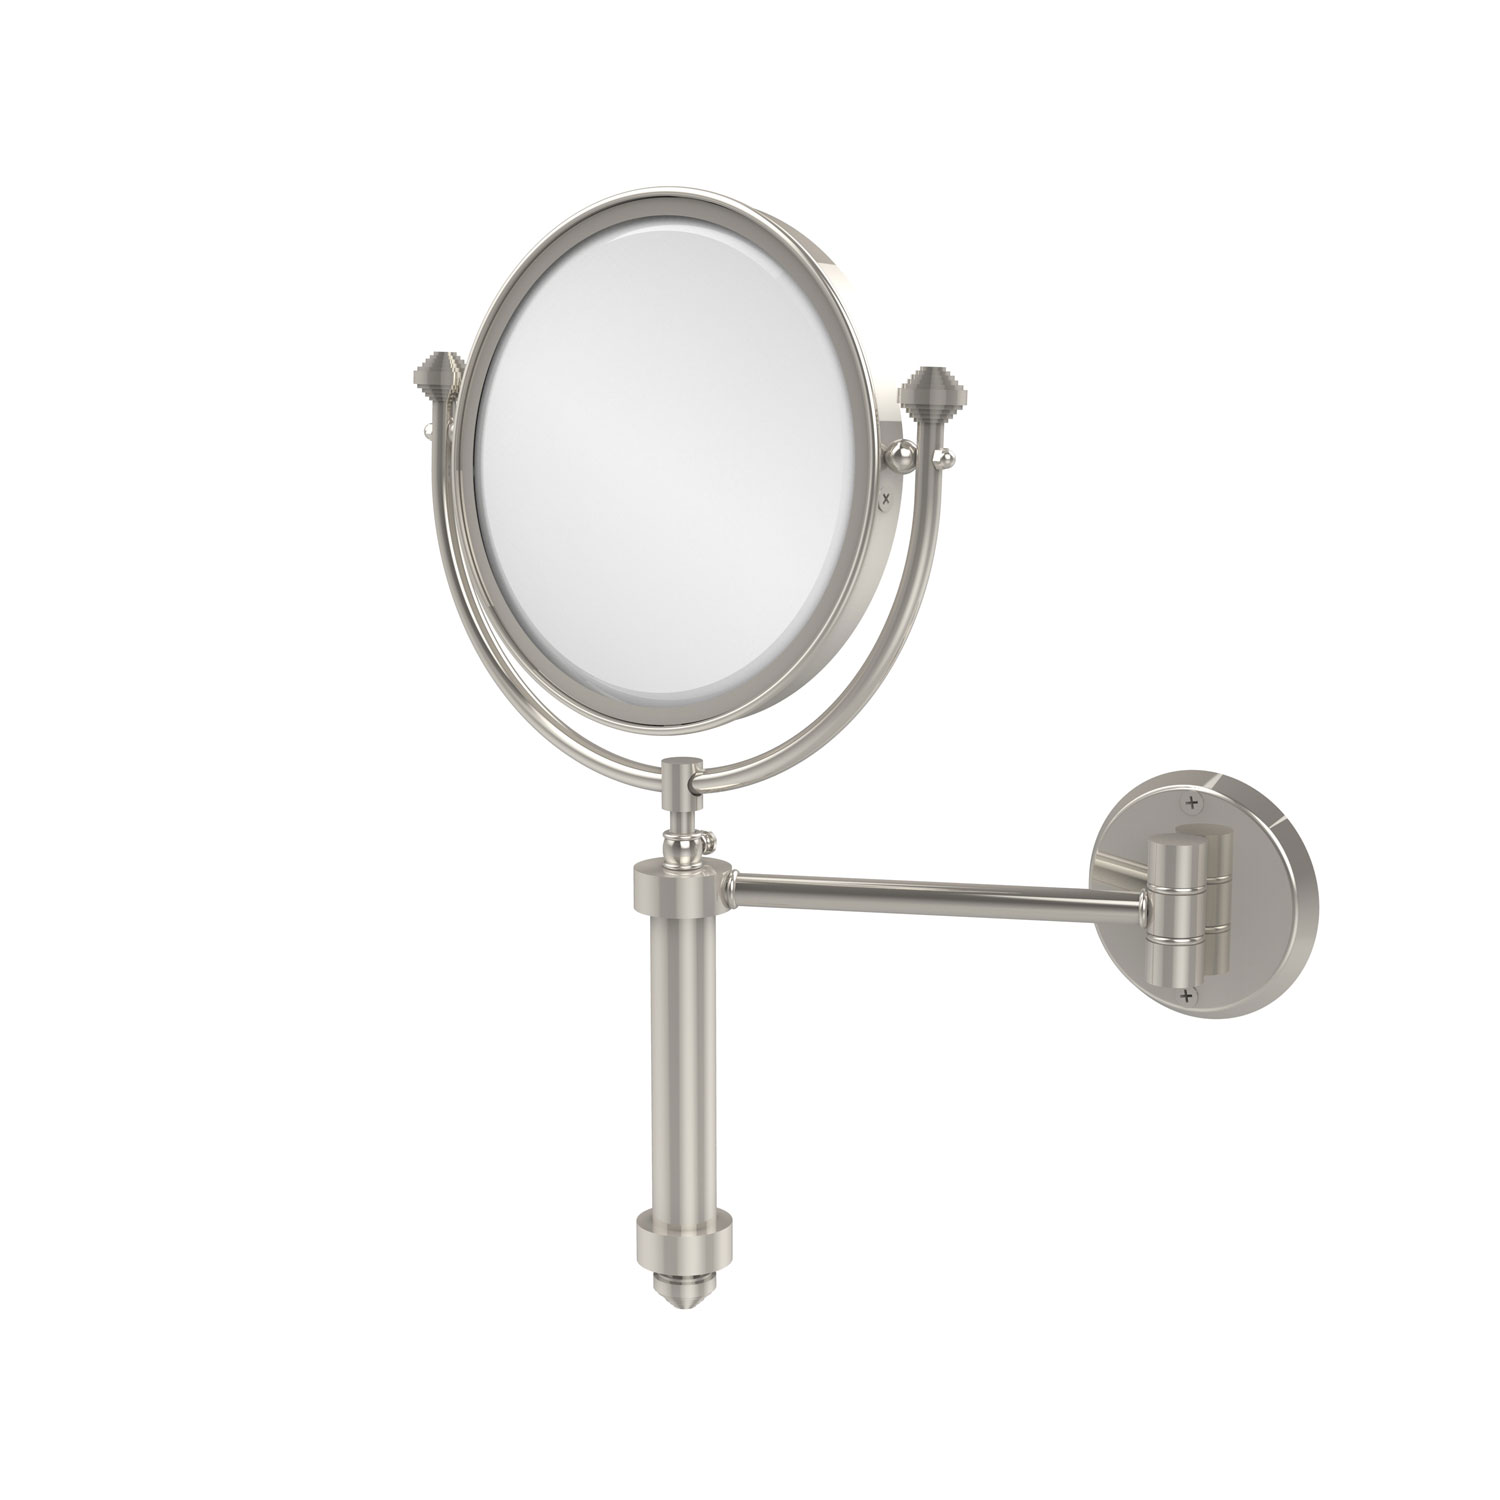 Southbeach Collection Wall Mounted Make-Up Mirror 8 Inch Diameter With 2X Magnification, Polished Nickel